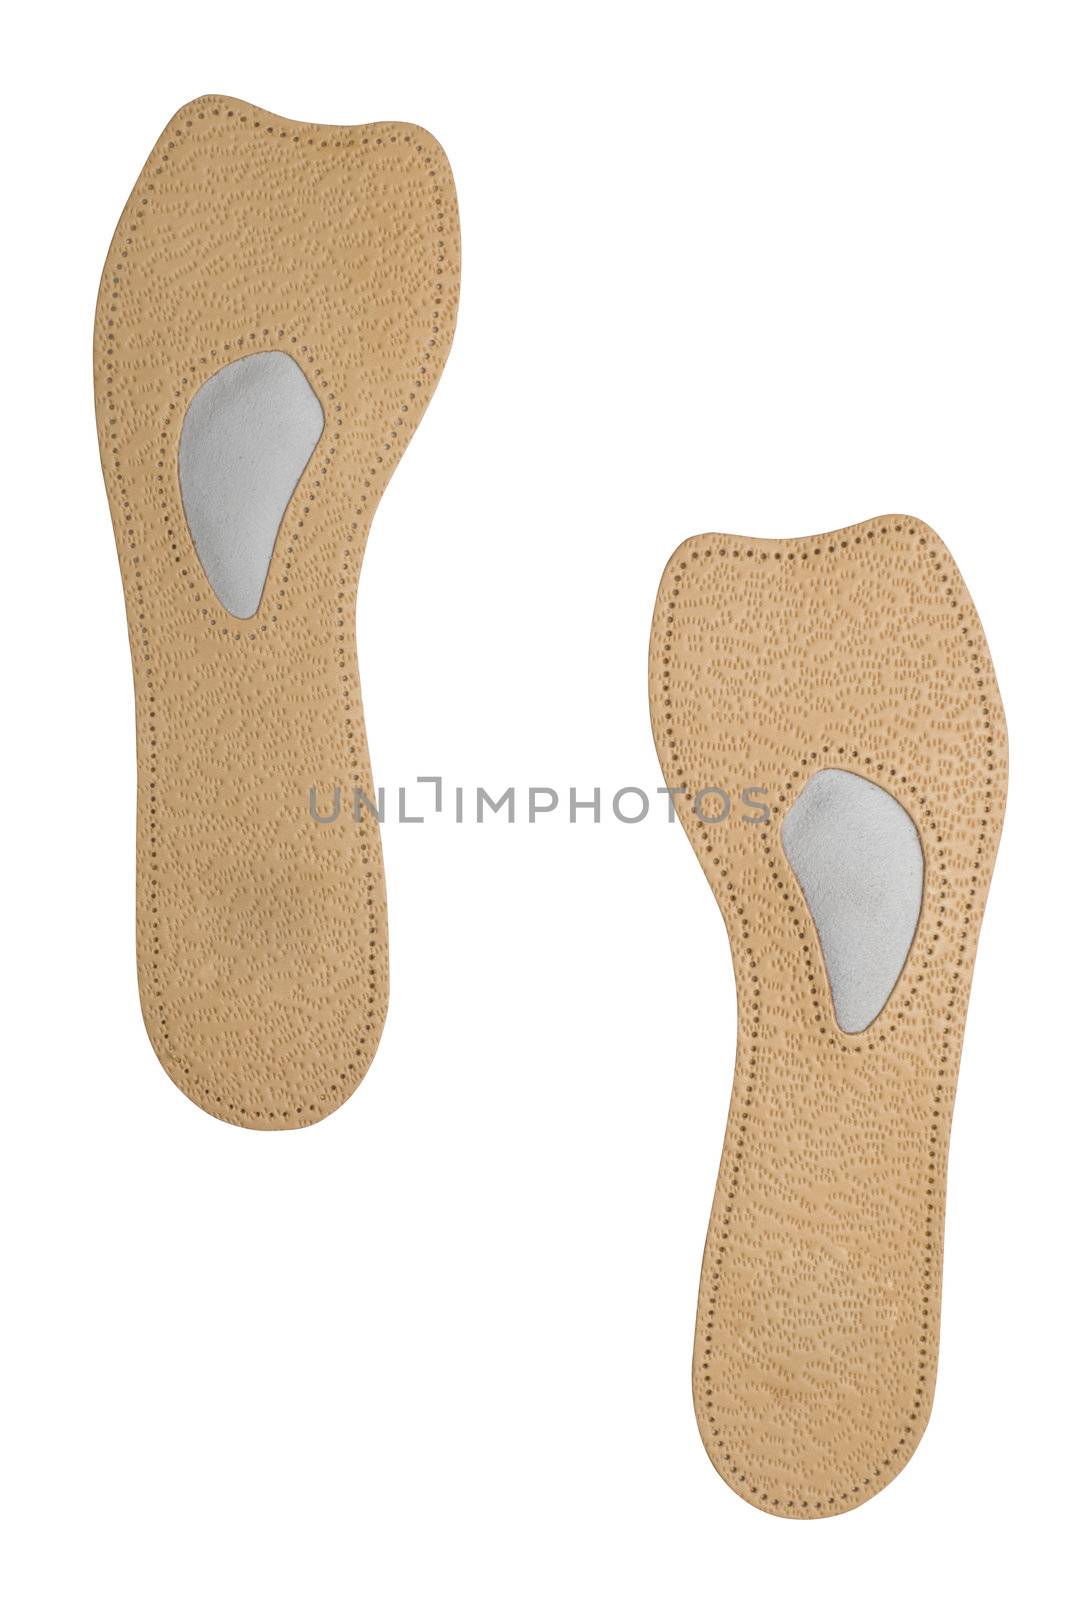 Insoles with instep supports for footwear. Isolated on white background